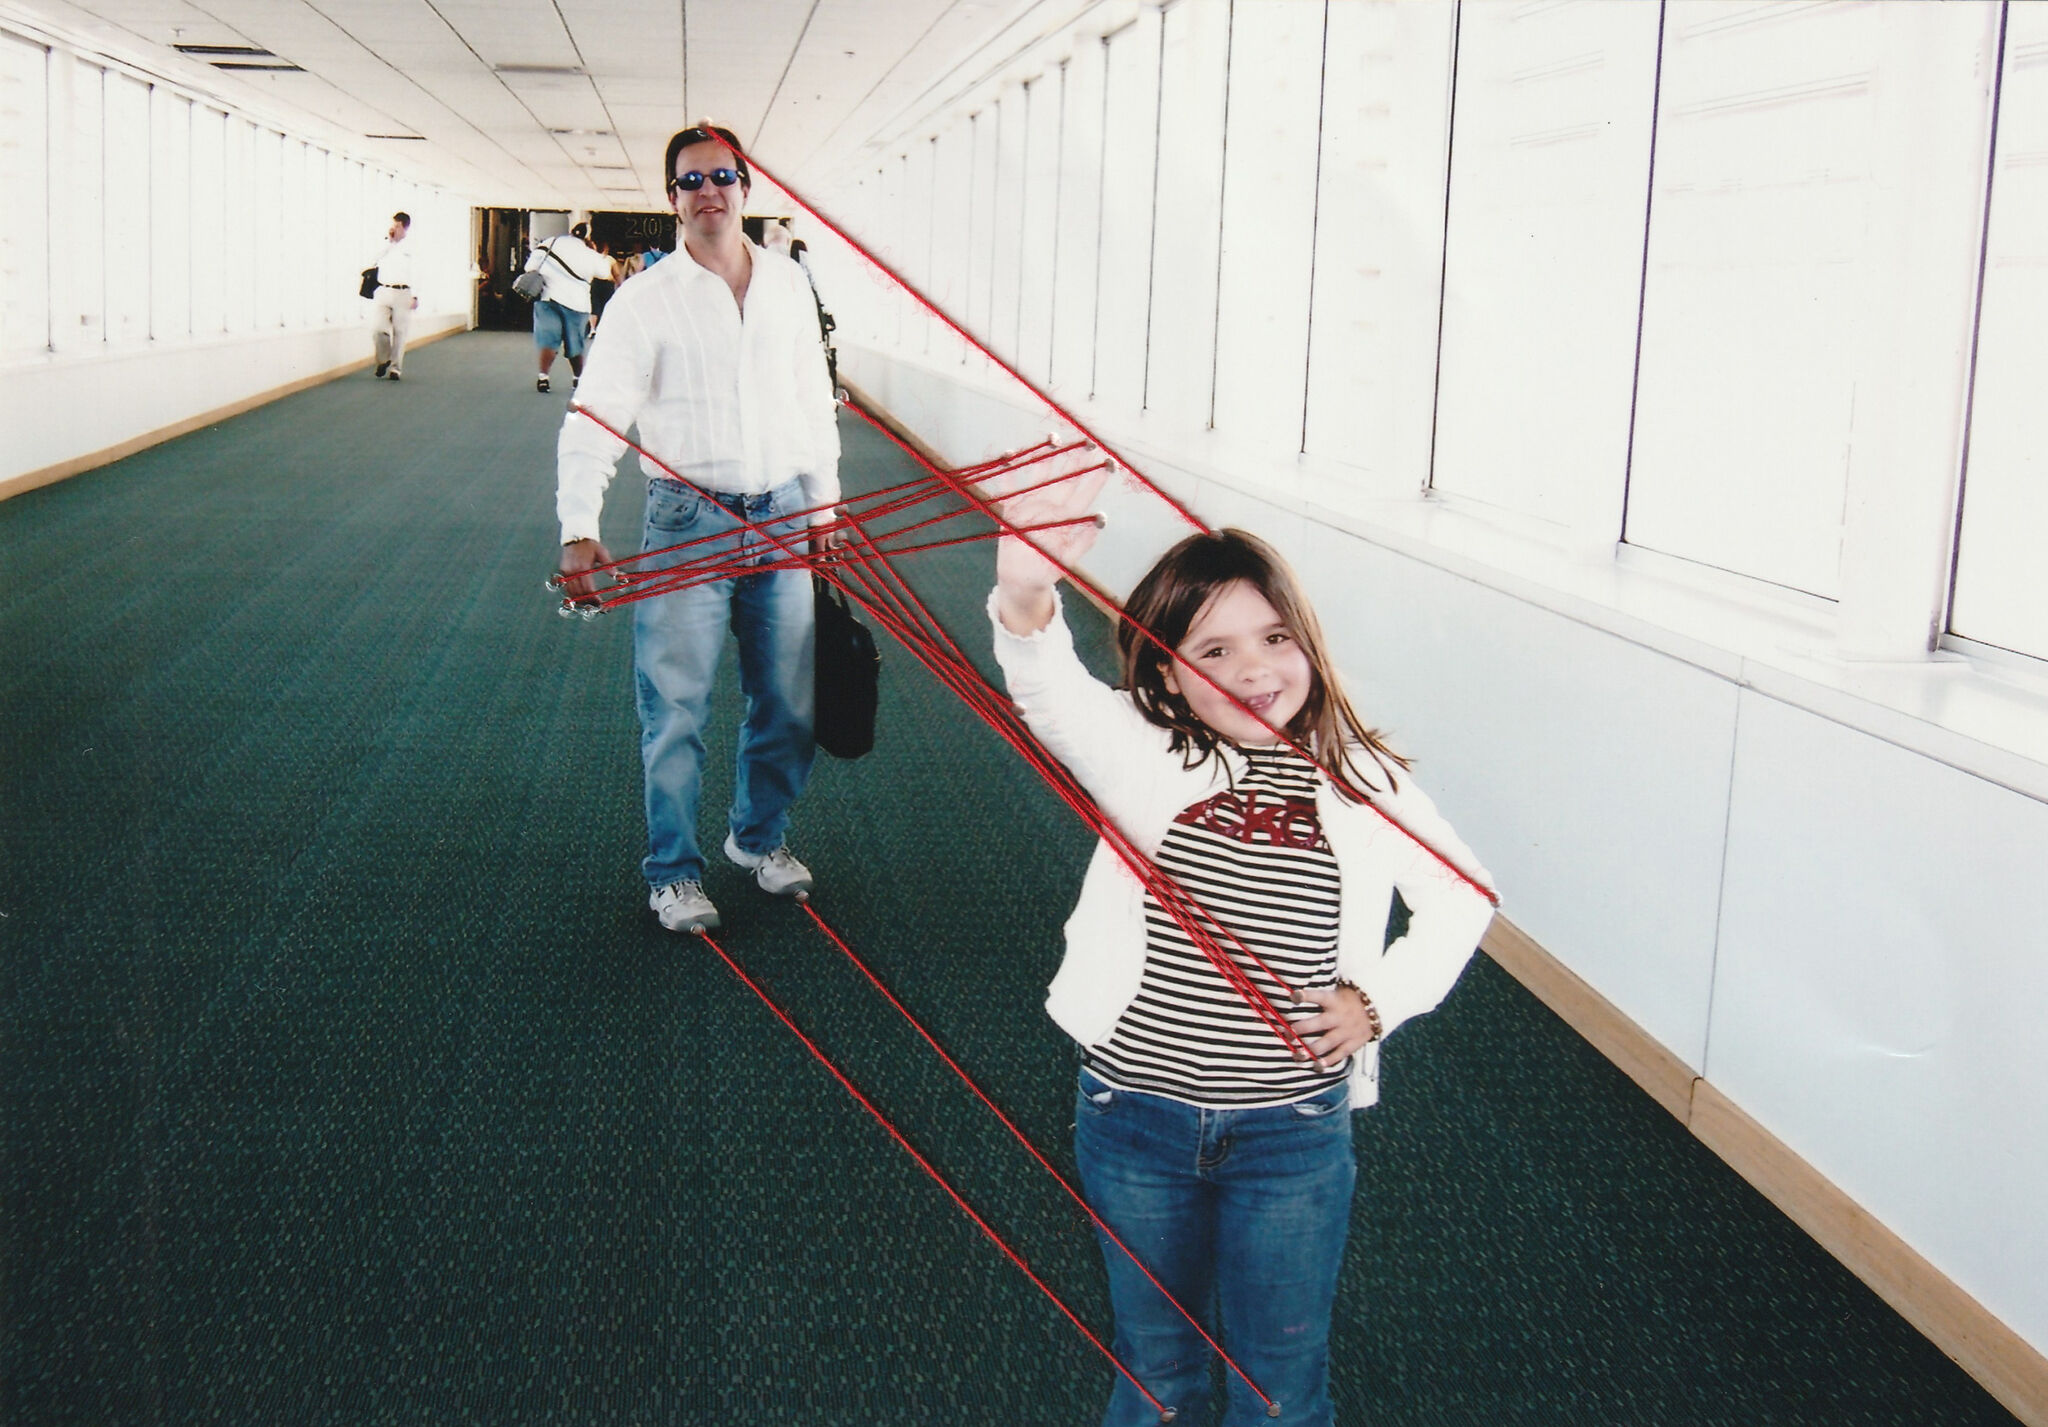 A photograph of a man and young girl with lines of red thread attached to the photograph.